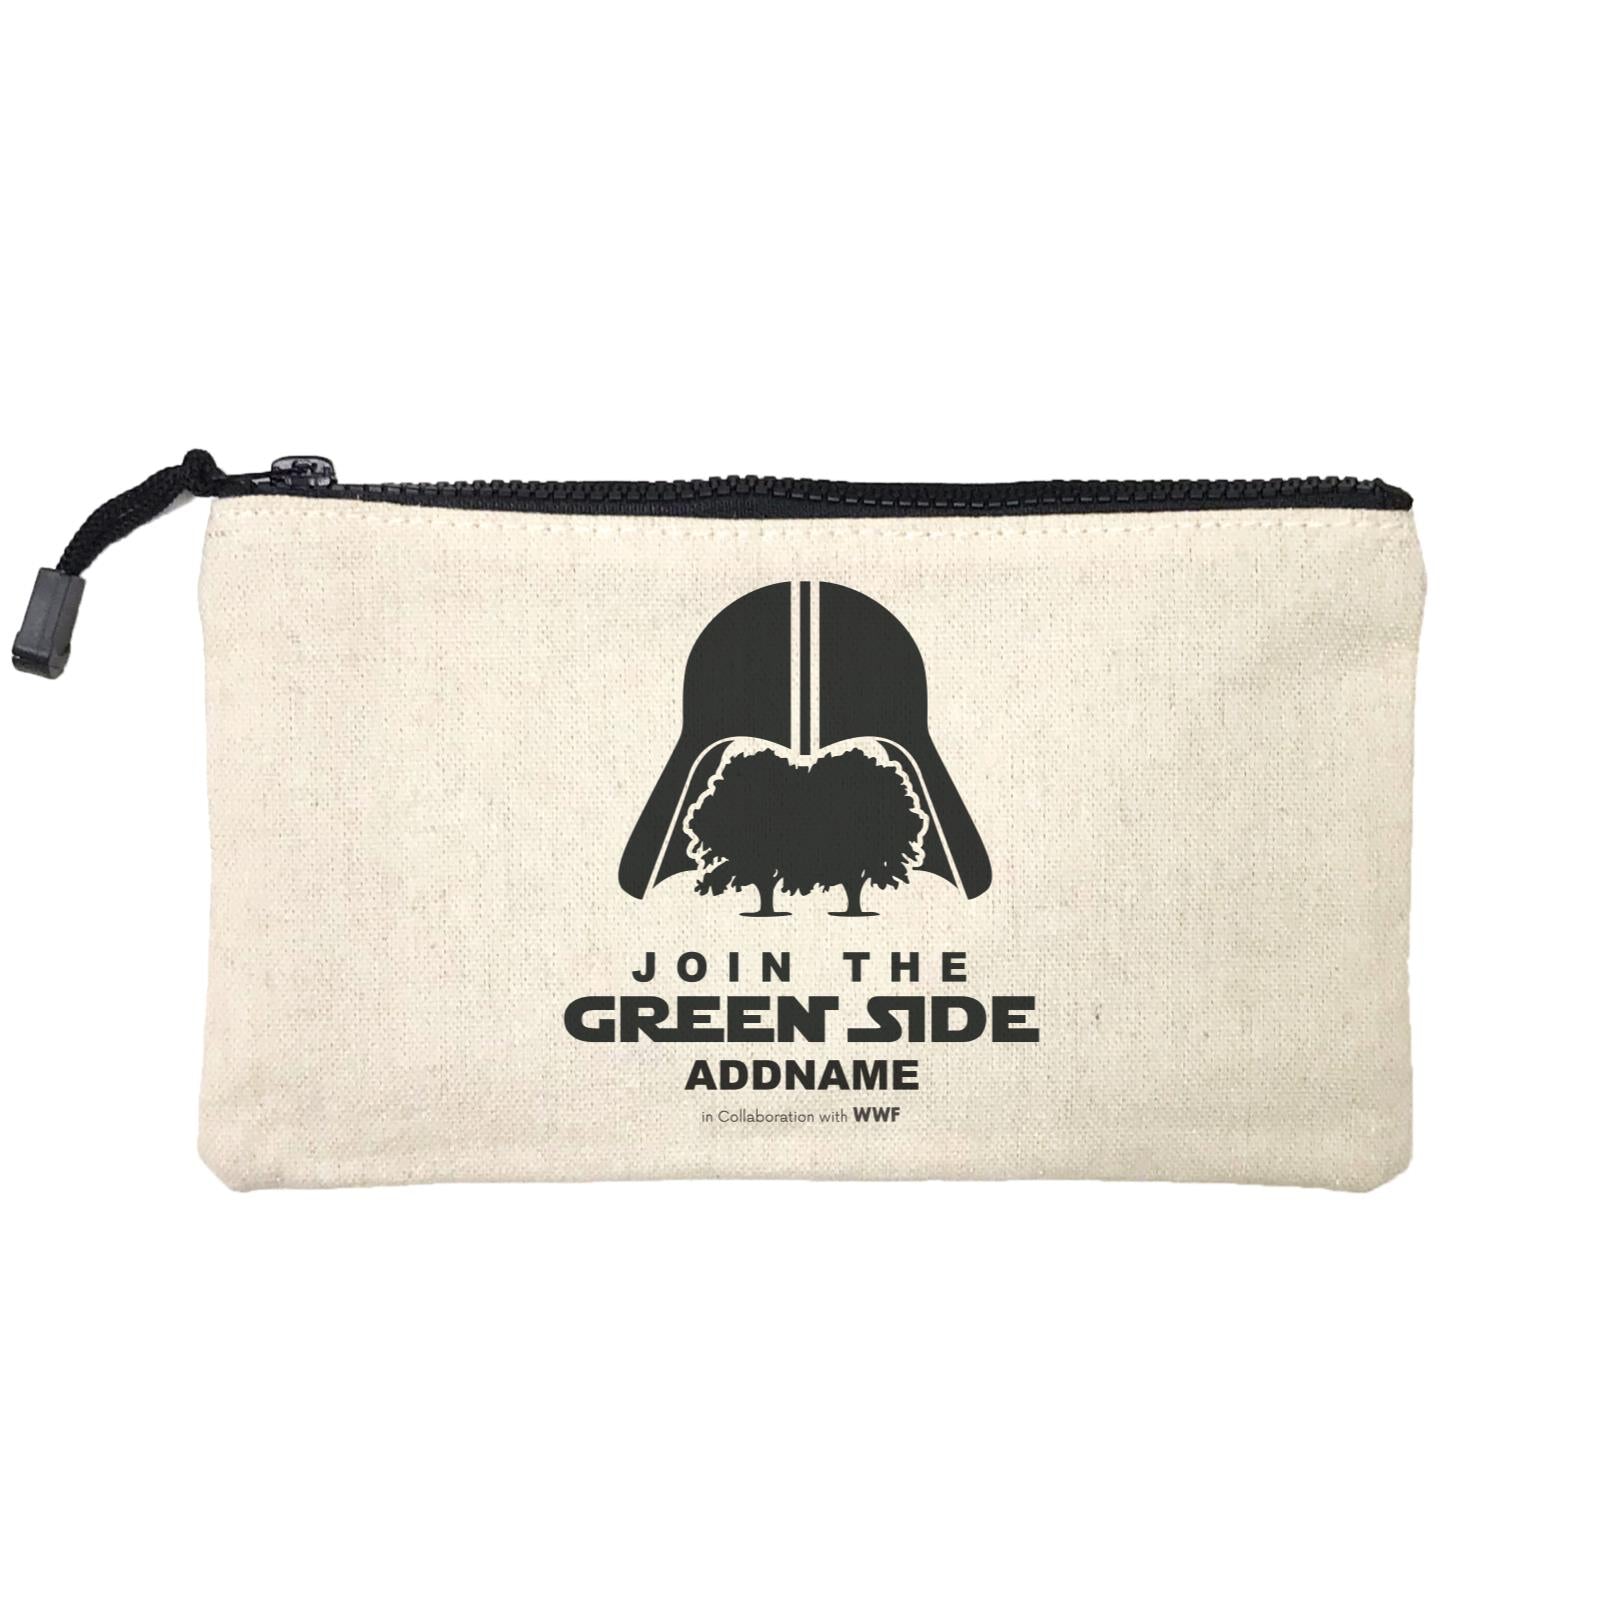 Join The Green Side Addname Mini Accessories Stationery Pouch